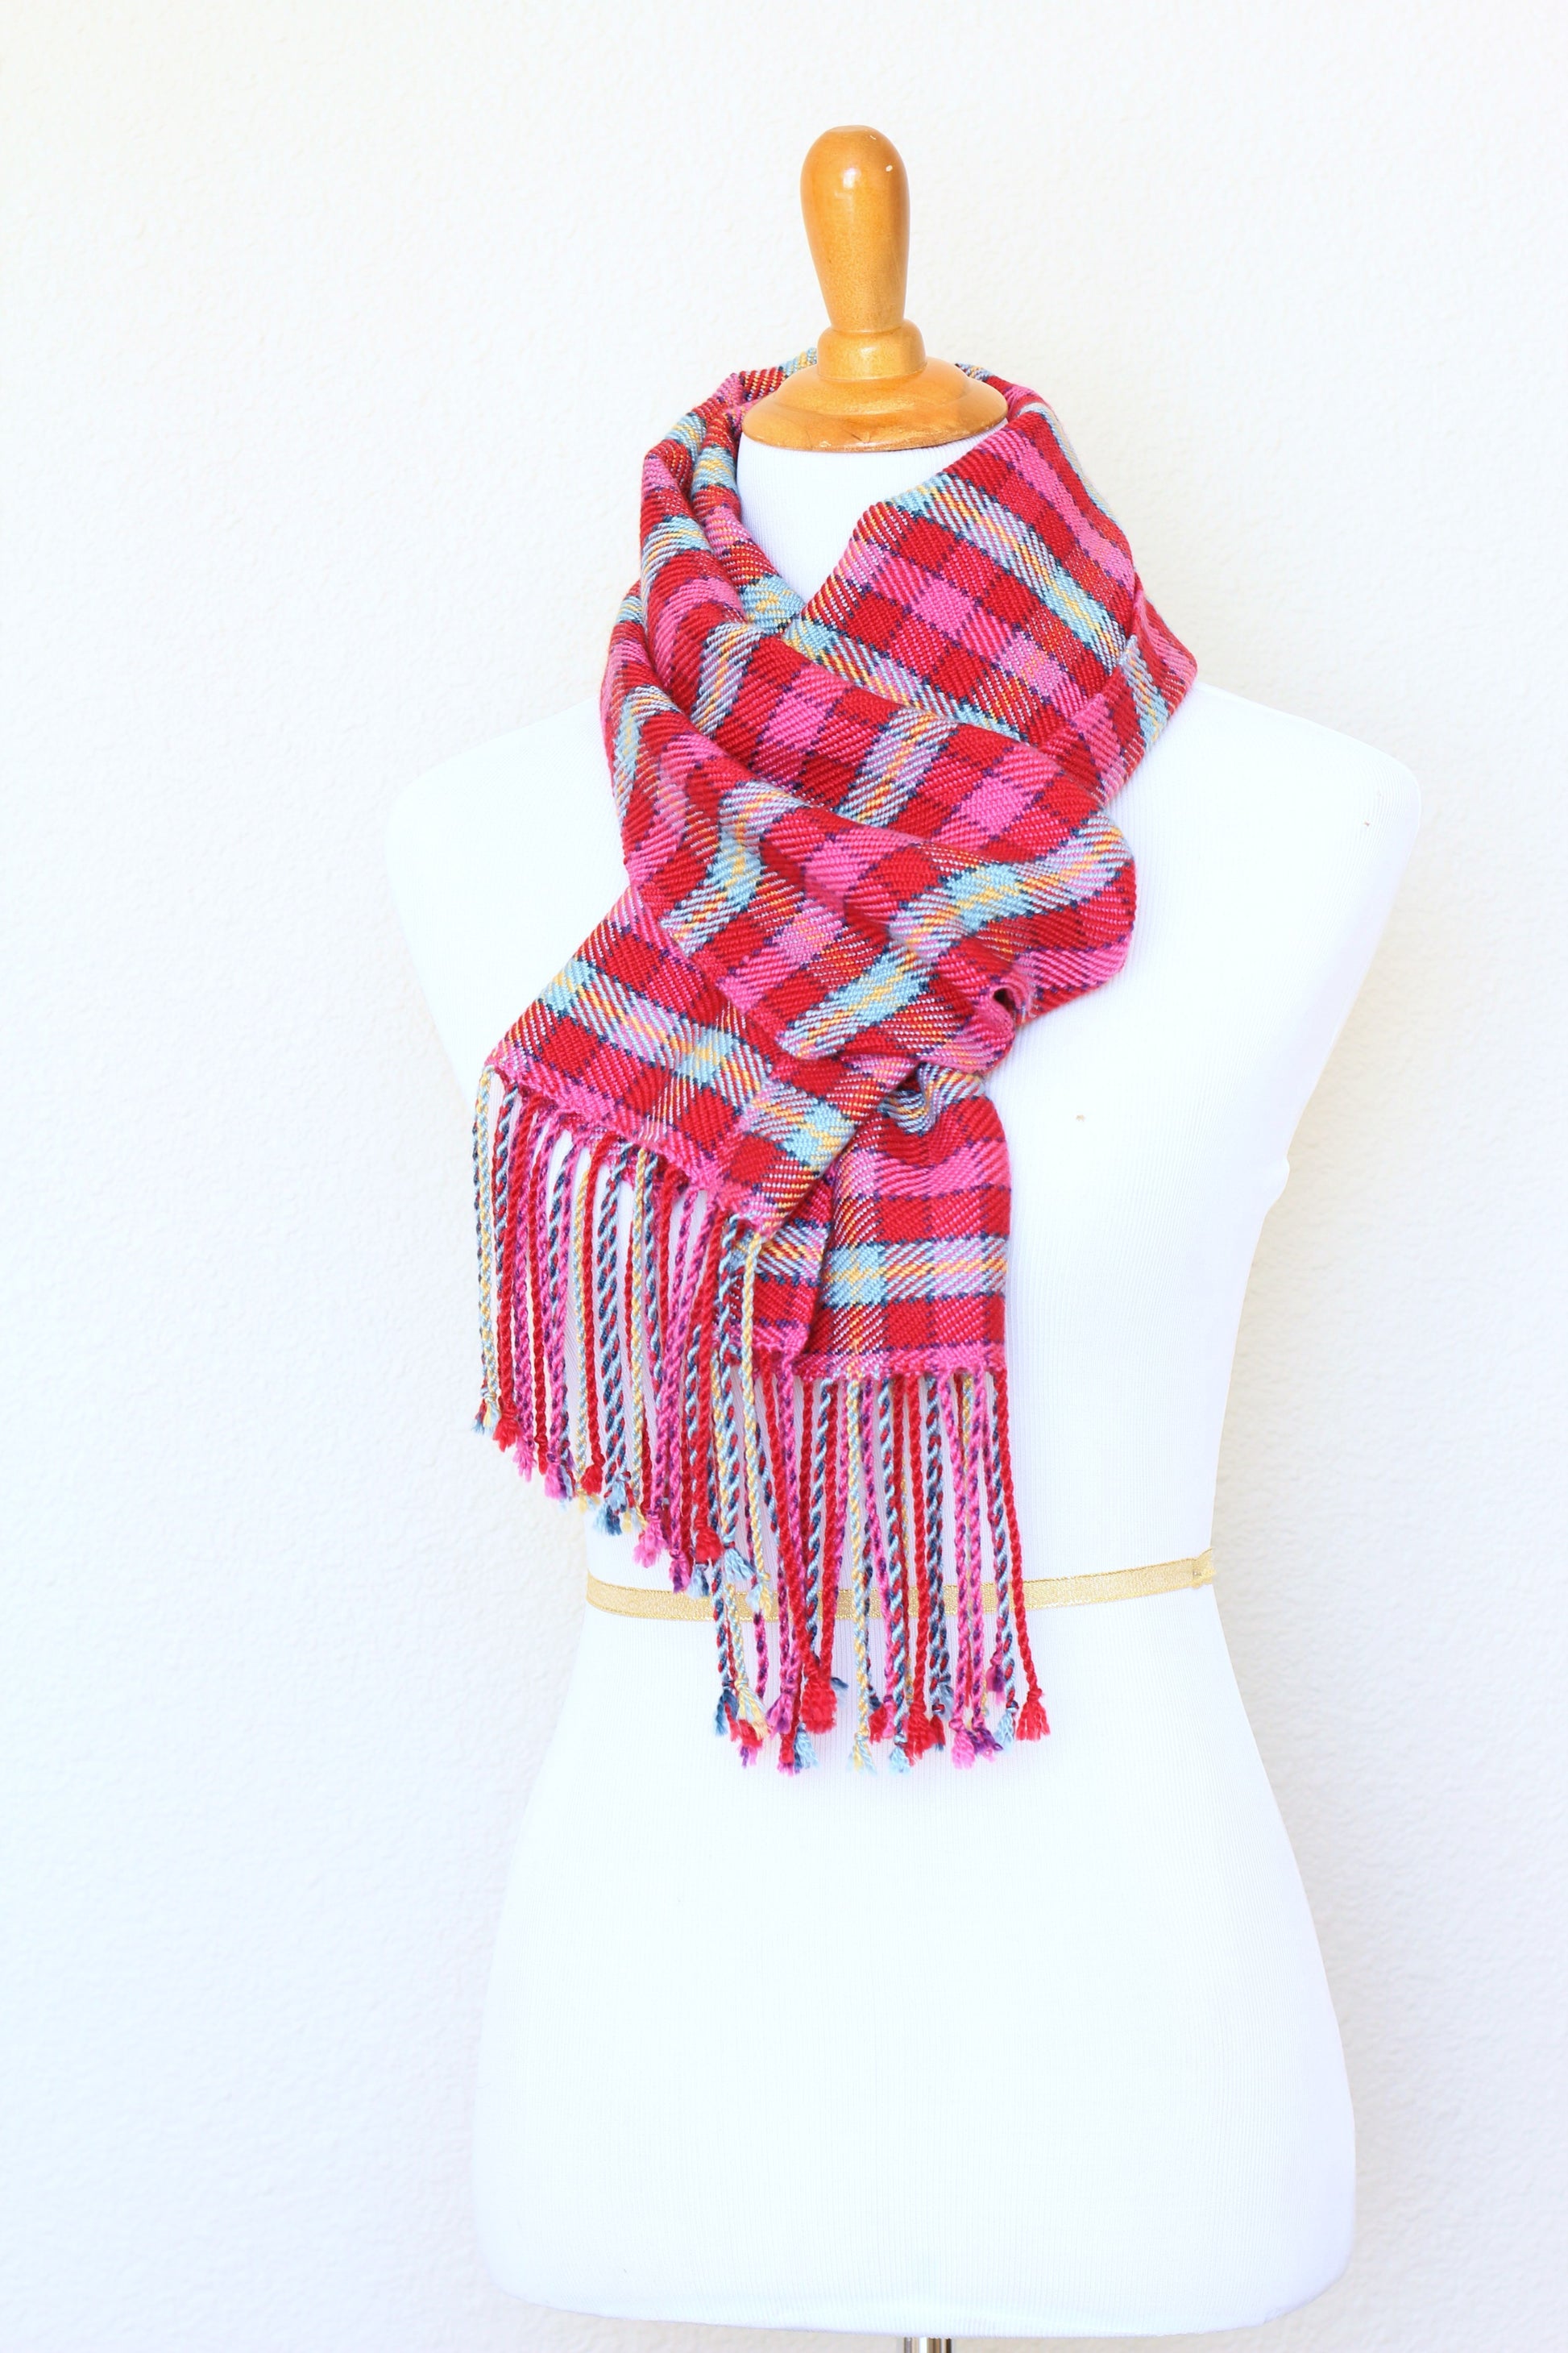 Woven tartan scarf in pink fuchsia and blue colors, long scarf with fringe